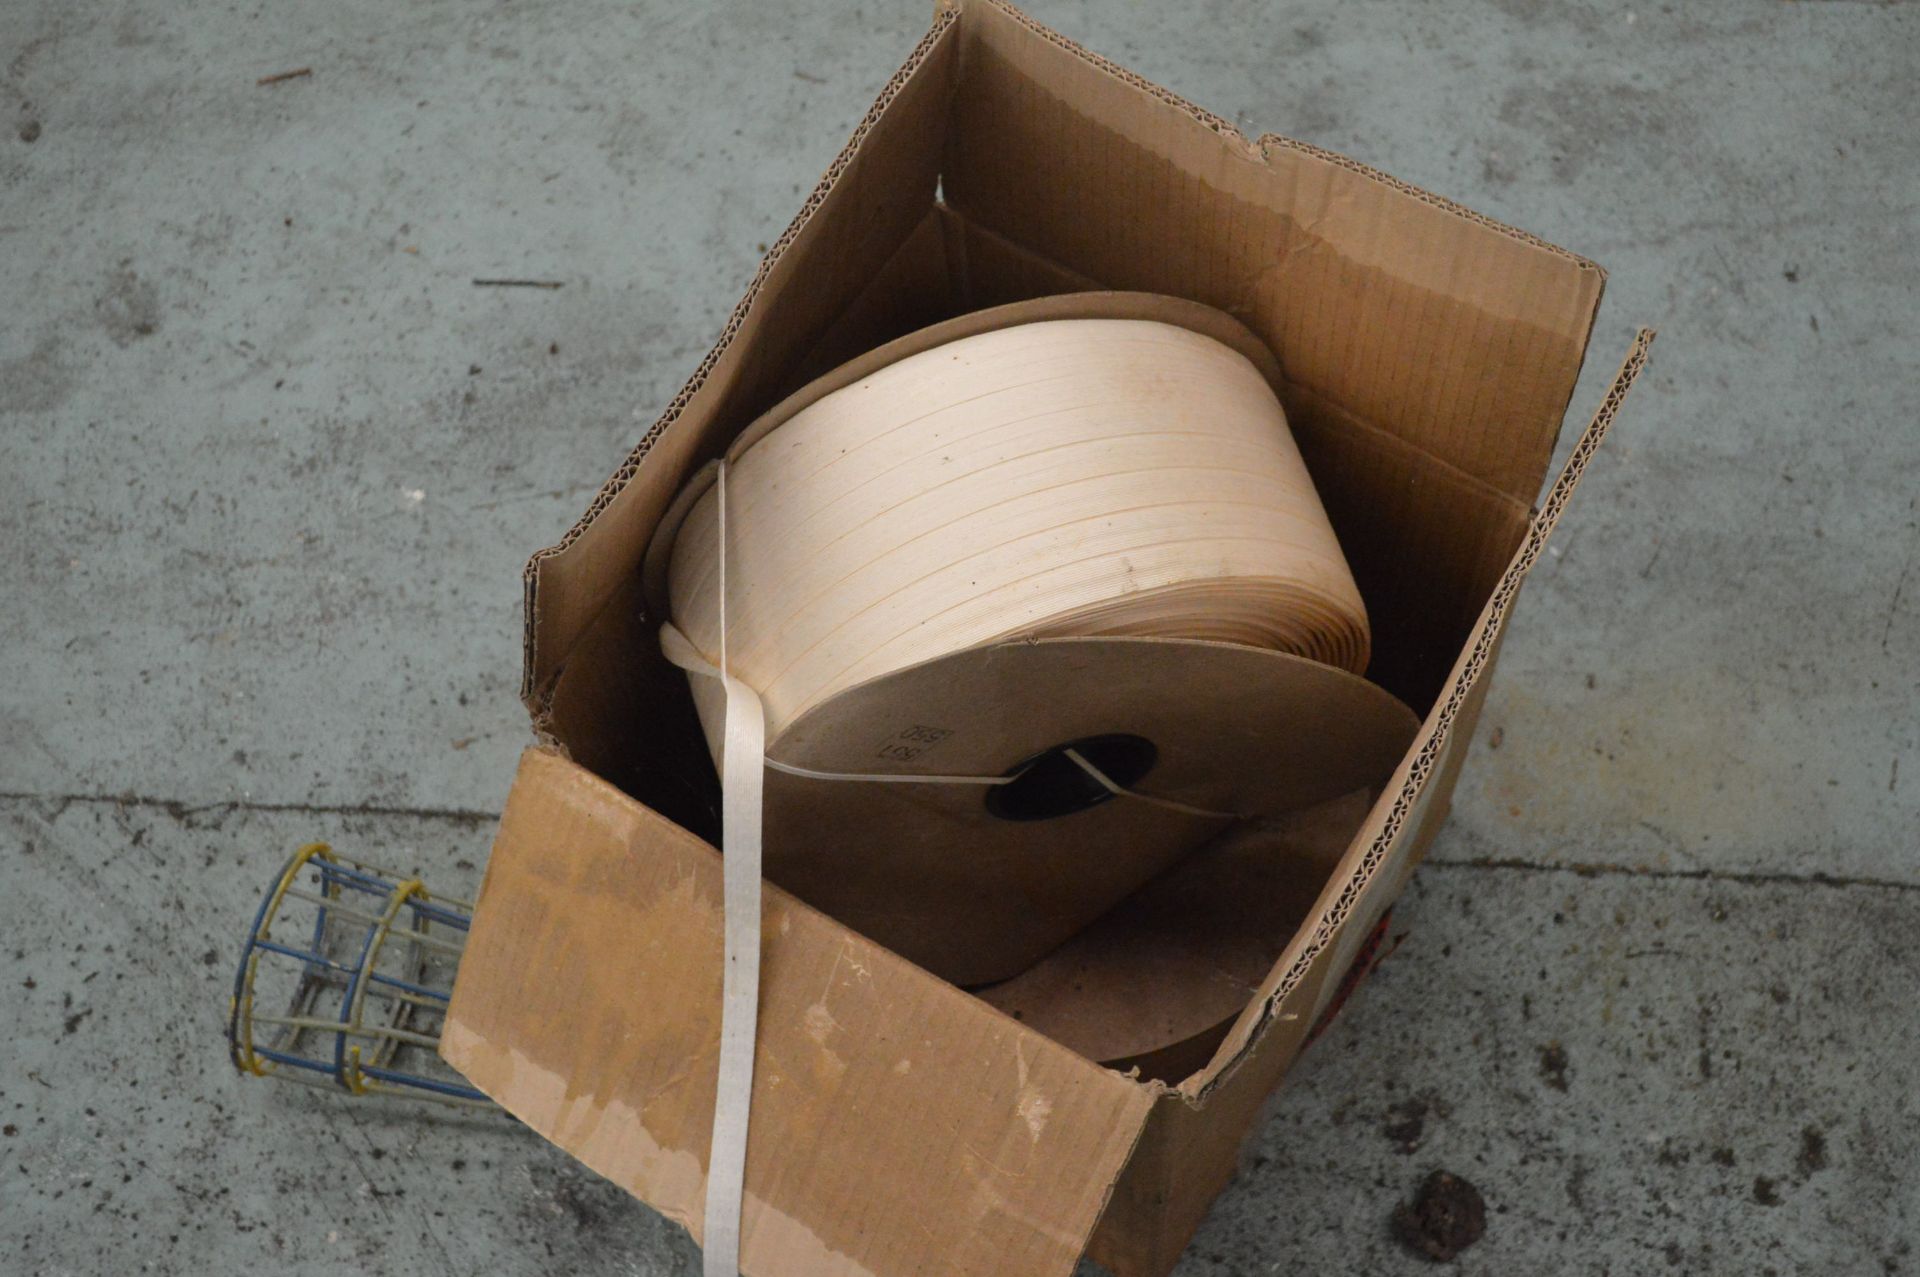 Two Rolls of Strap Banding Tape